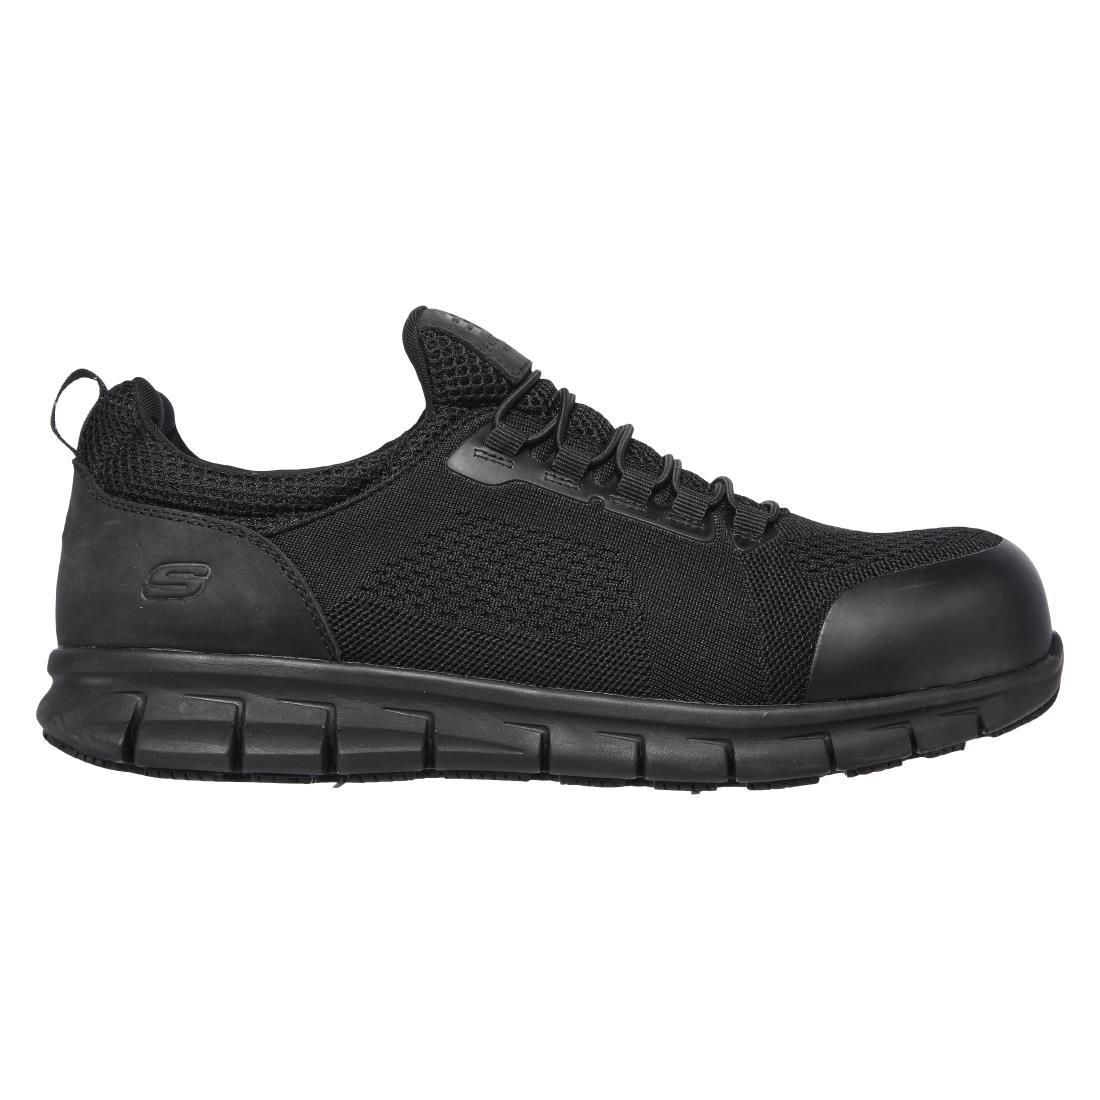 Skechers Safety Shoe with Steel Toe Cap Size 41 - BB675-41  - 4